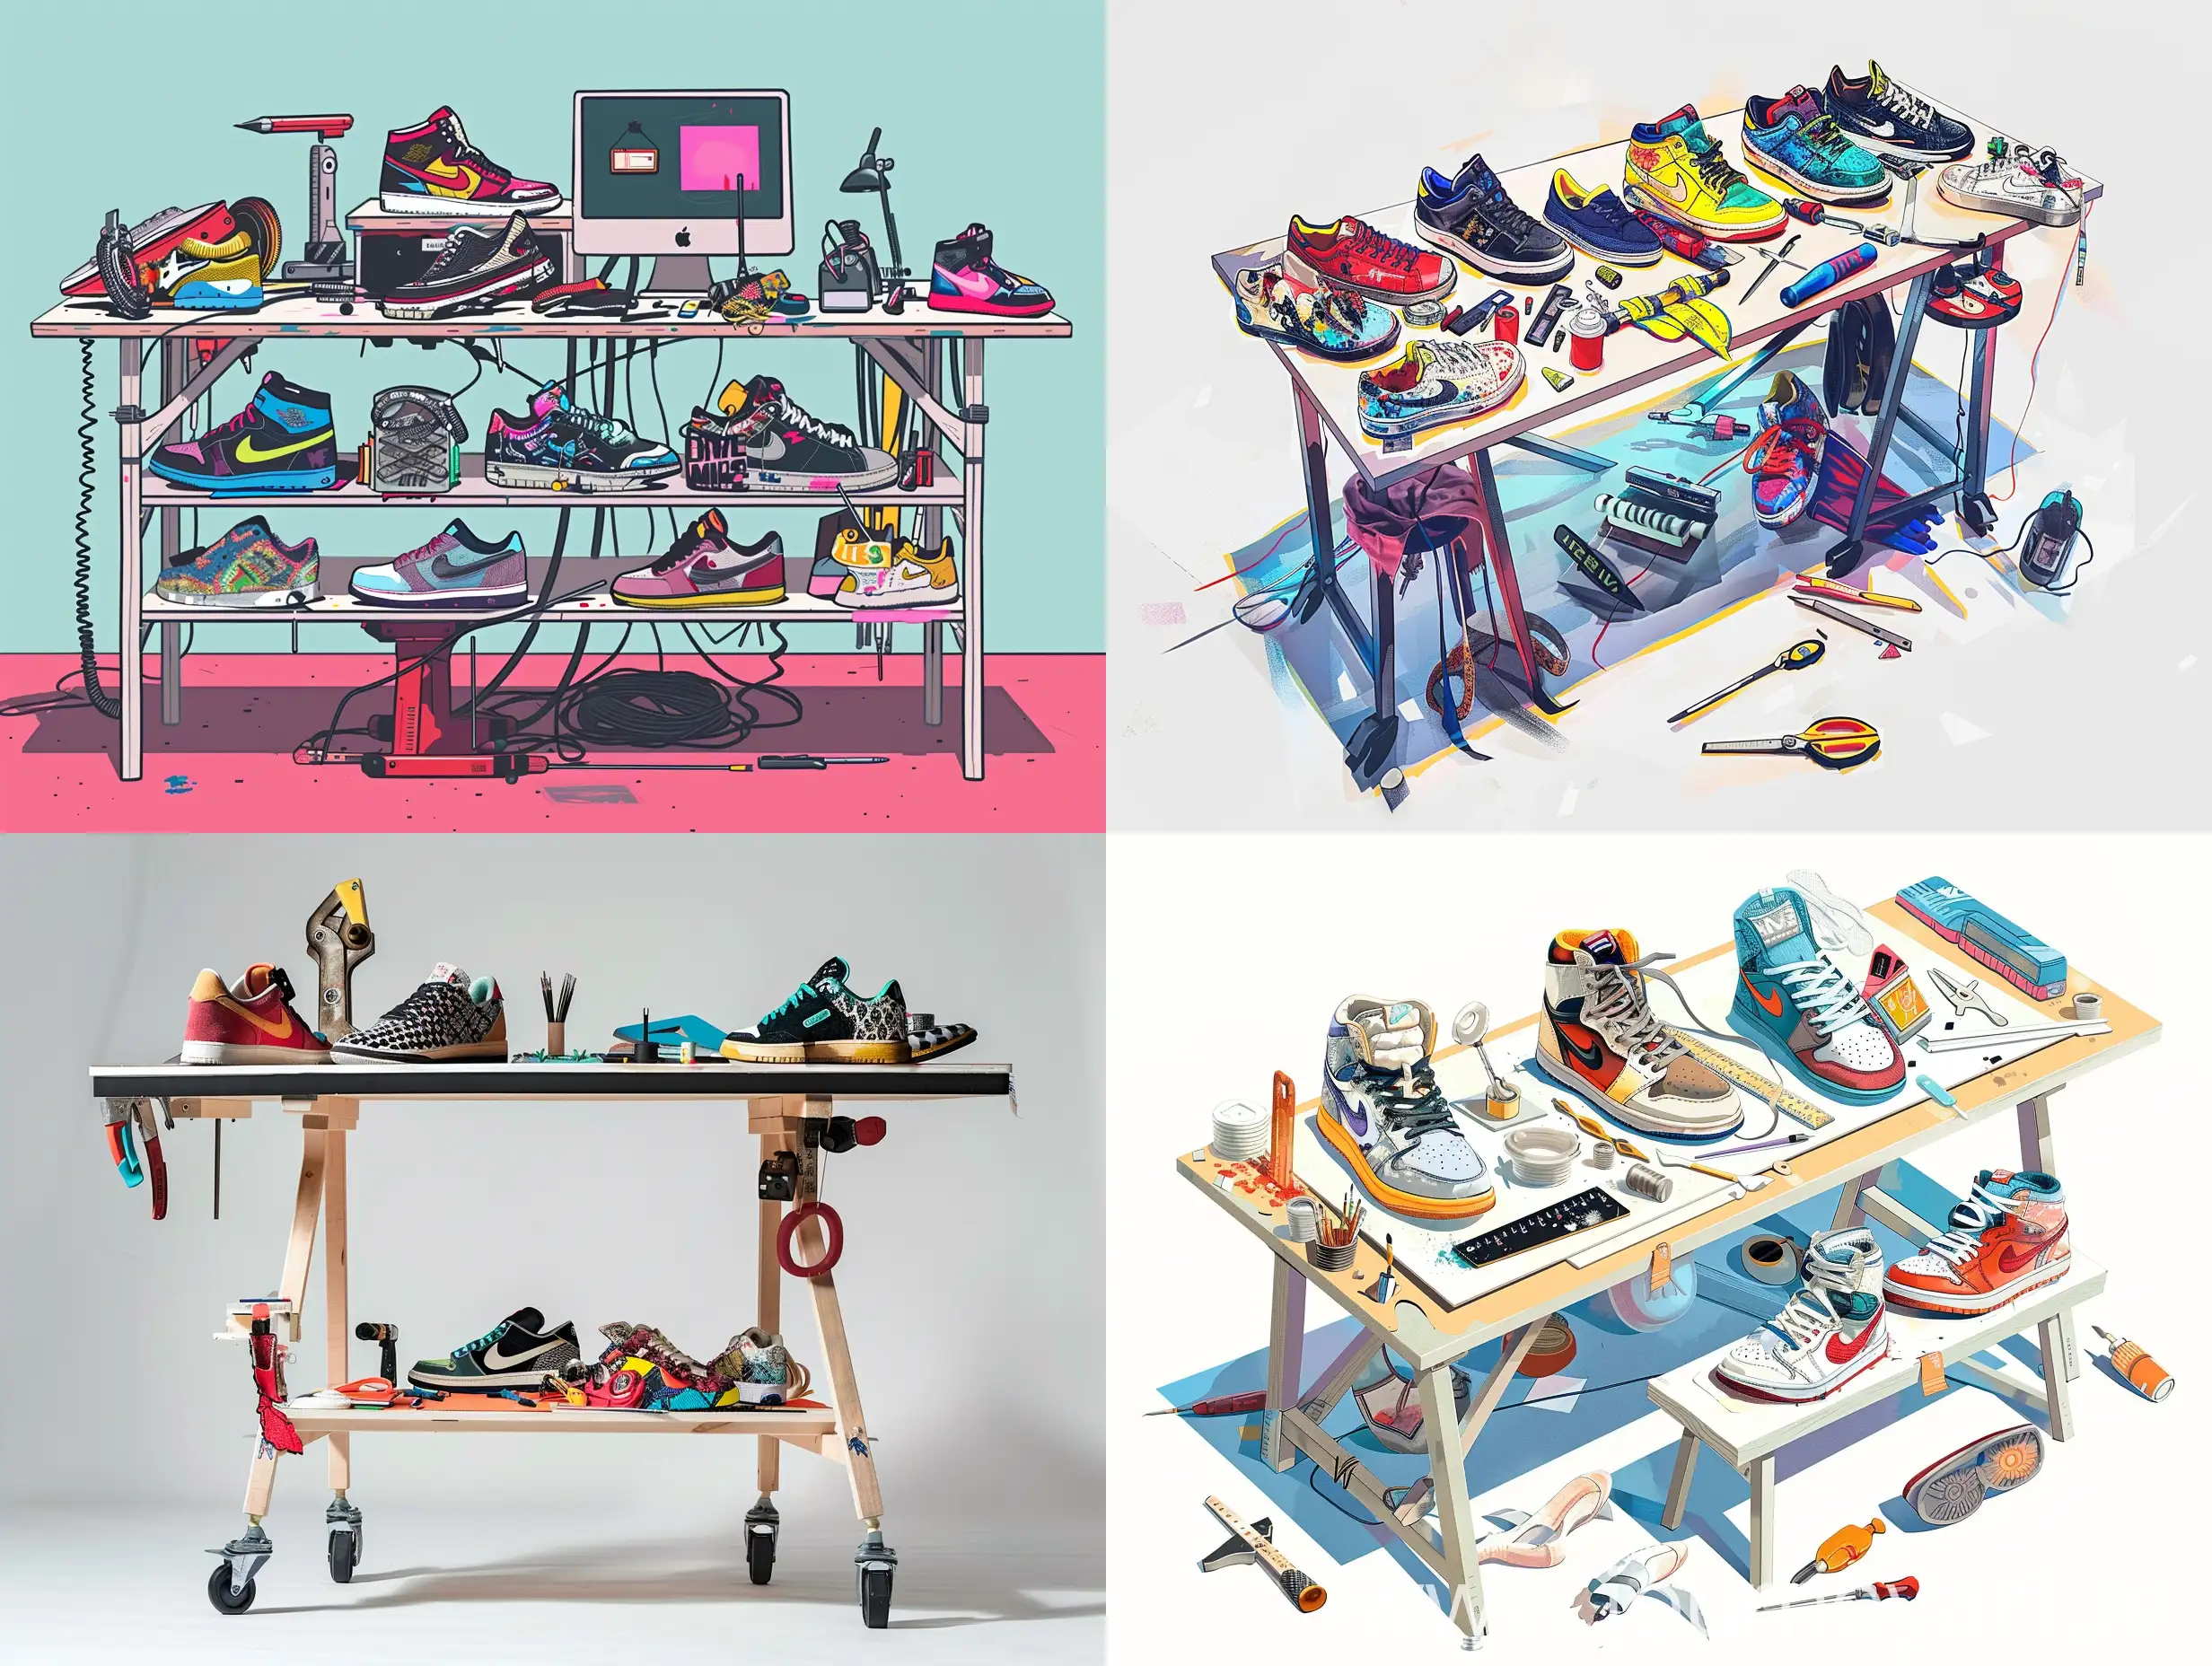 Generate a visually striking depiction of a DIY sneaker upcycling station, featuring a high table transformed into a vibrant workspace adorned with custom sneakers and creative tools, exuding an atmosphere of artistic passion and innovation.